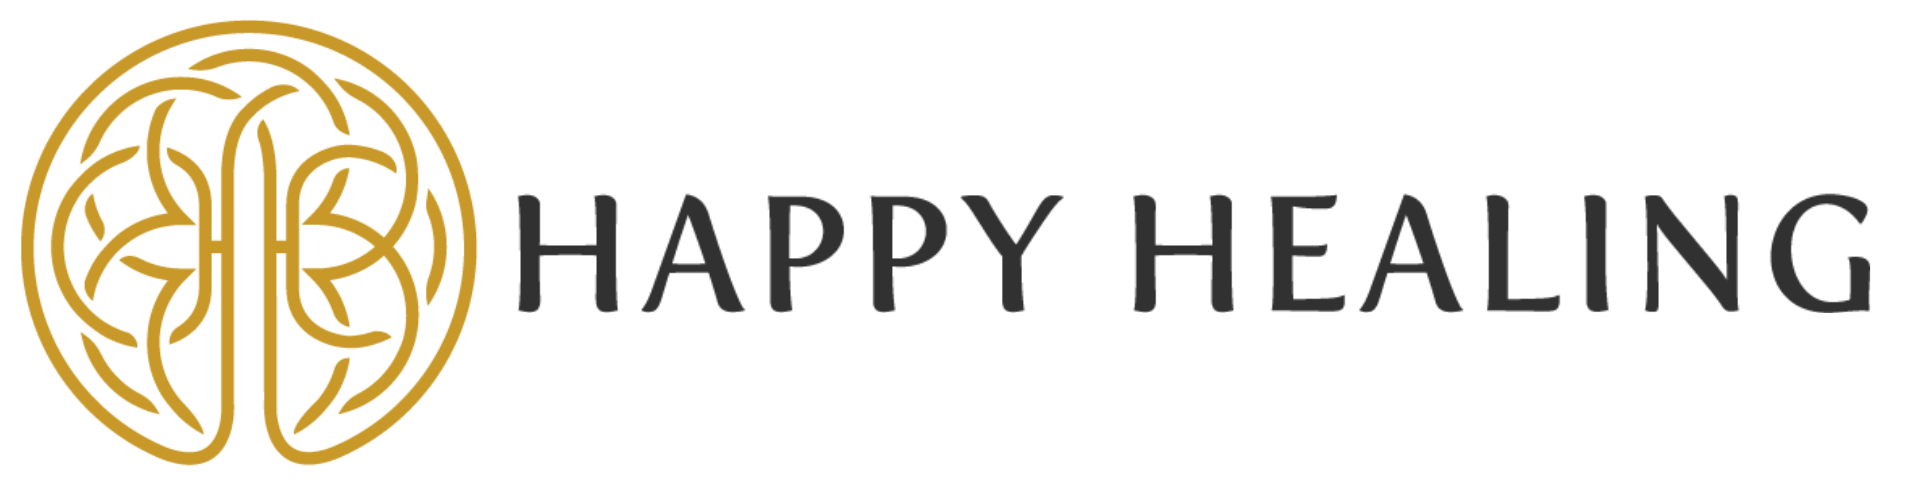 Logo of The Happy Healing Store featuring symbolic healing elements.